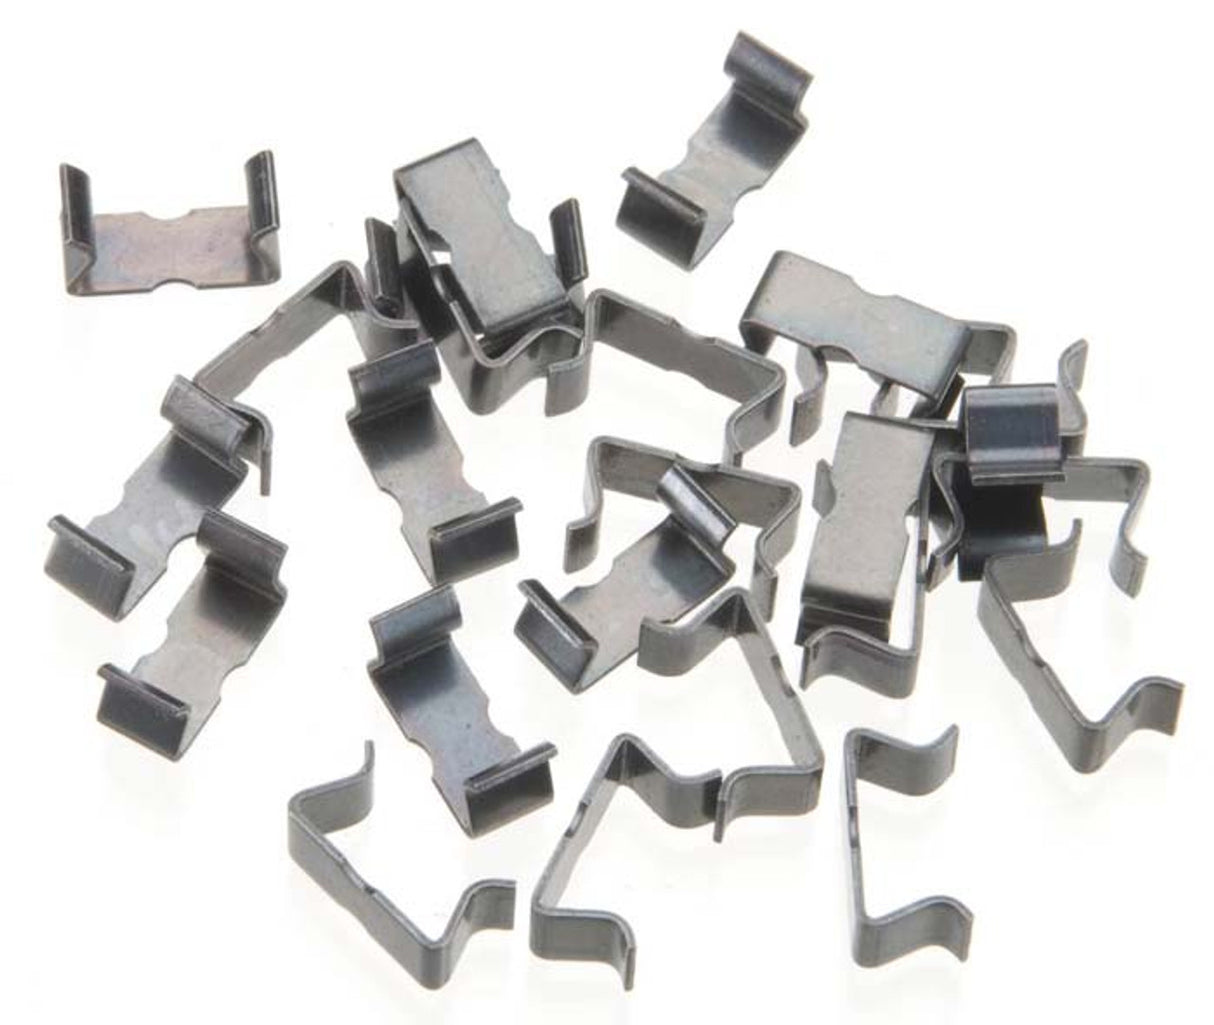 Silver metal track clips for AFX slot car racing, featuring multiple interlocking pieces in various shapes and sizes.